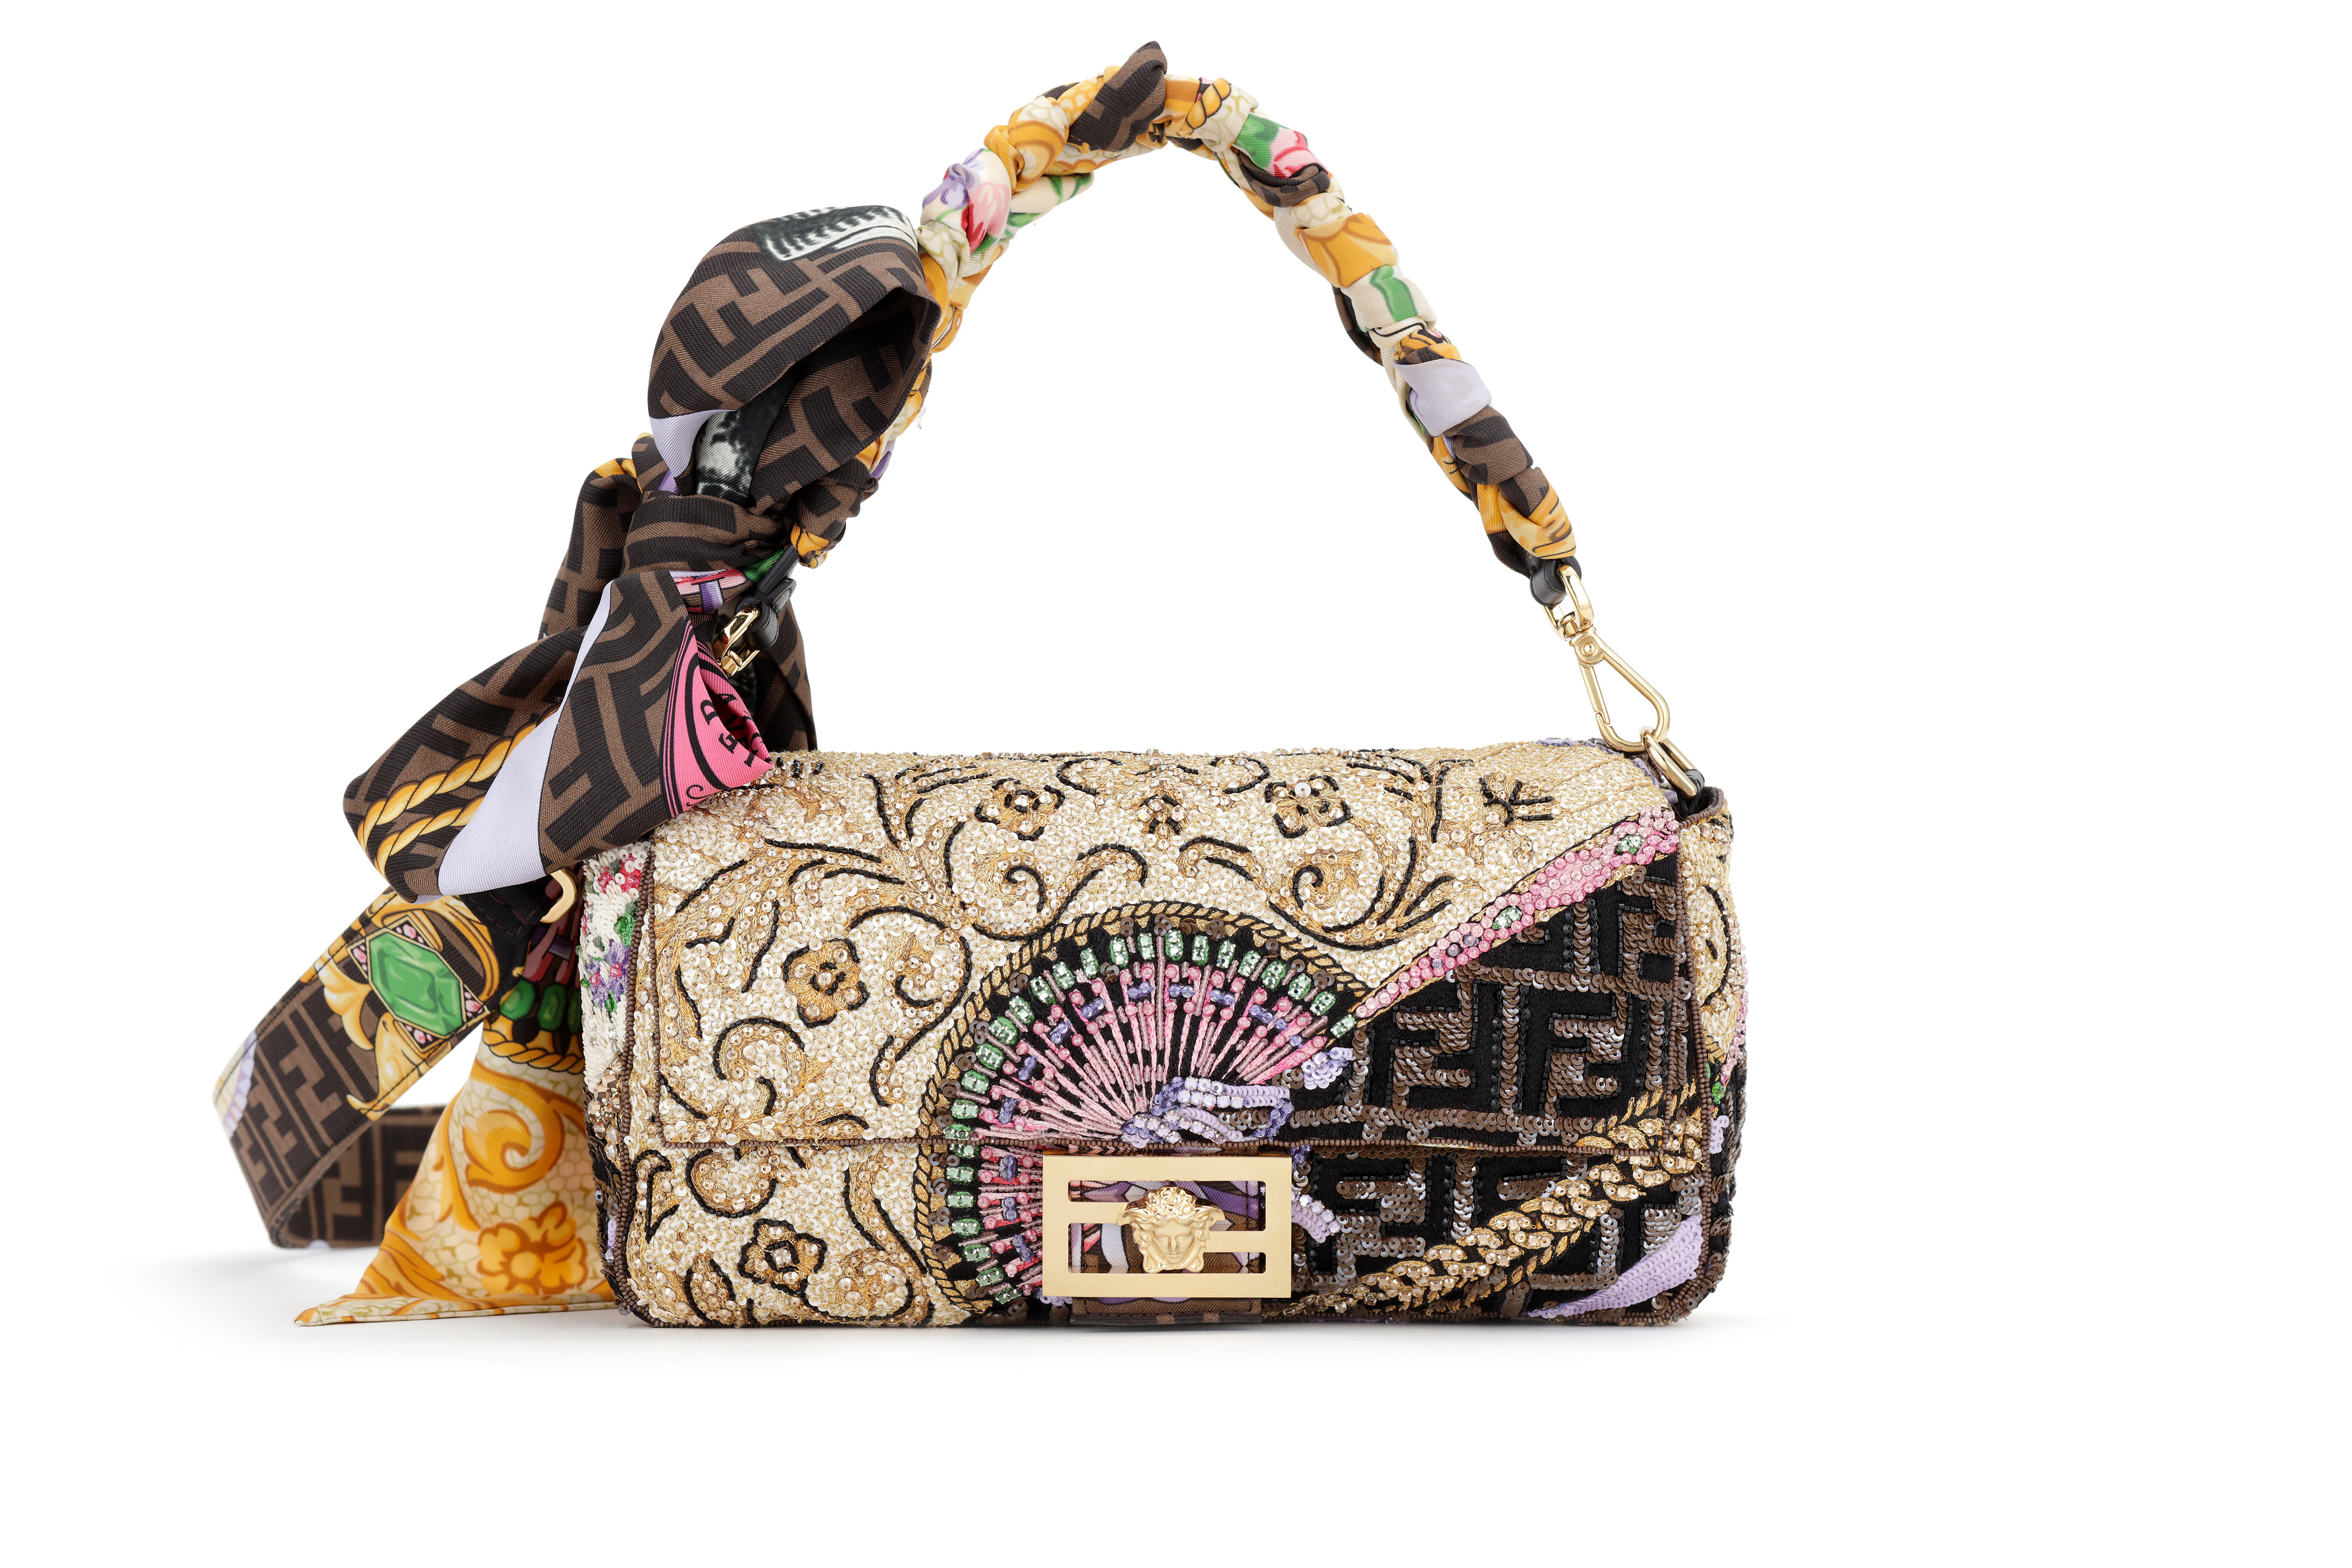 Fendi x Versace Fendace Convertible Shopping Tote (Outlet